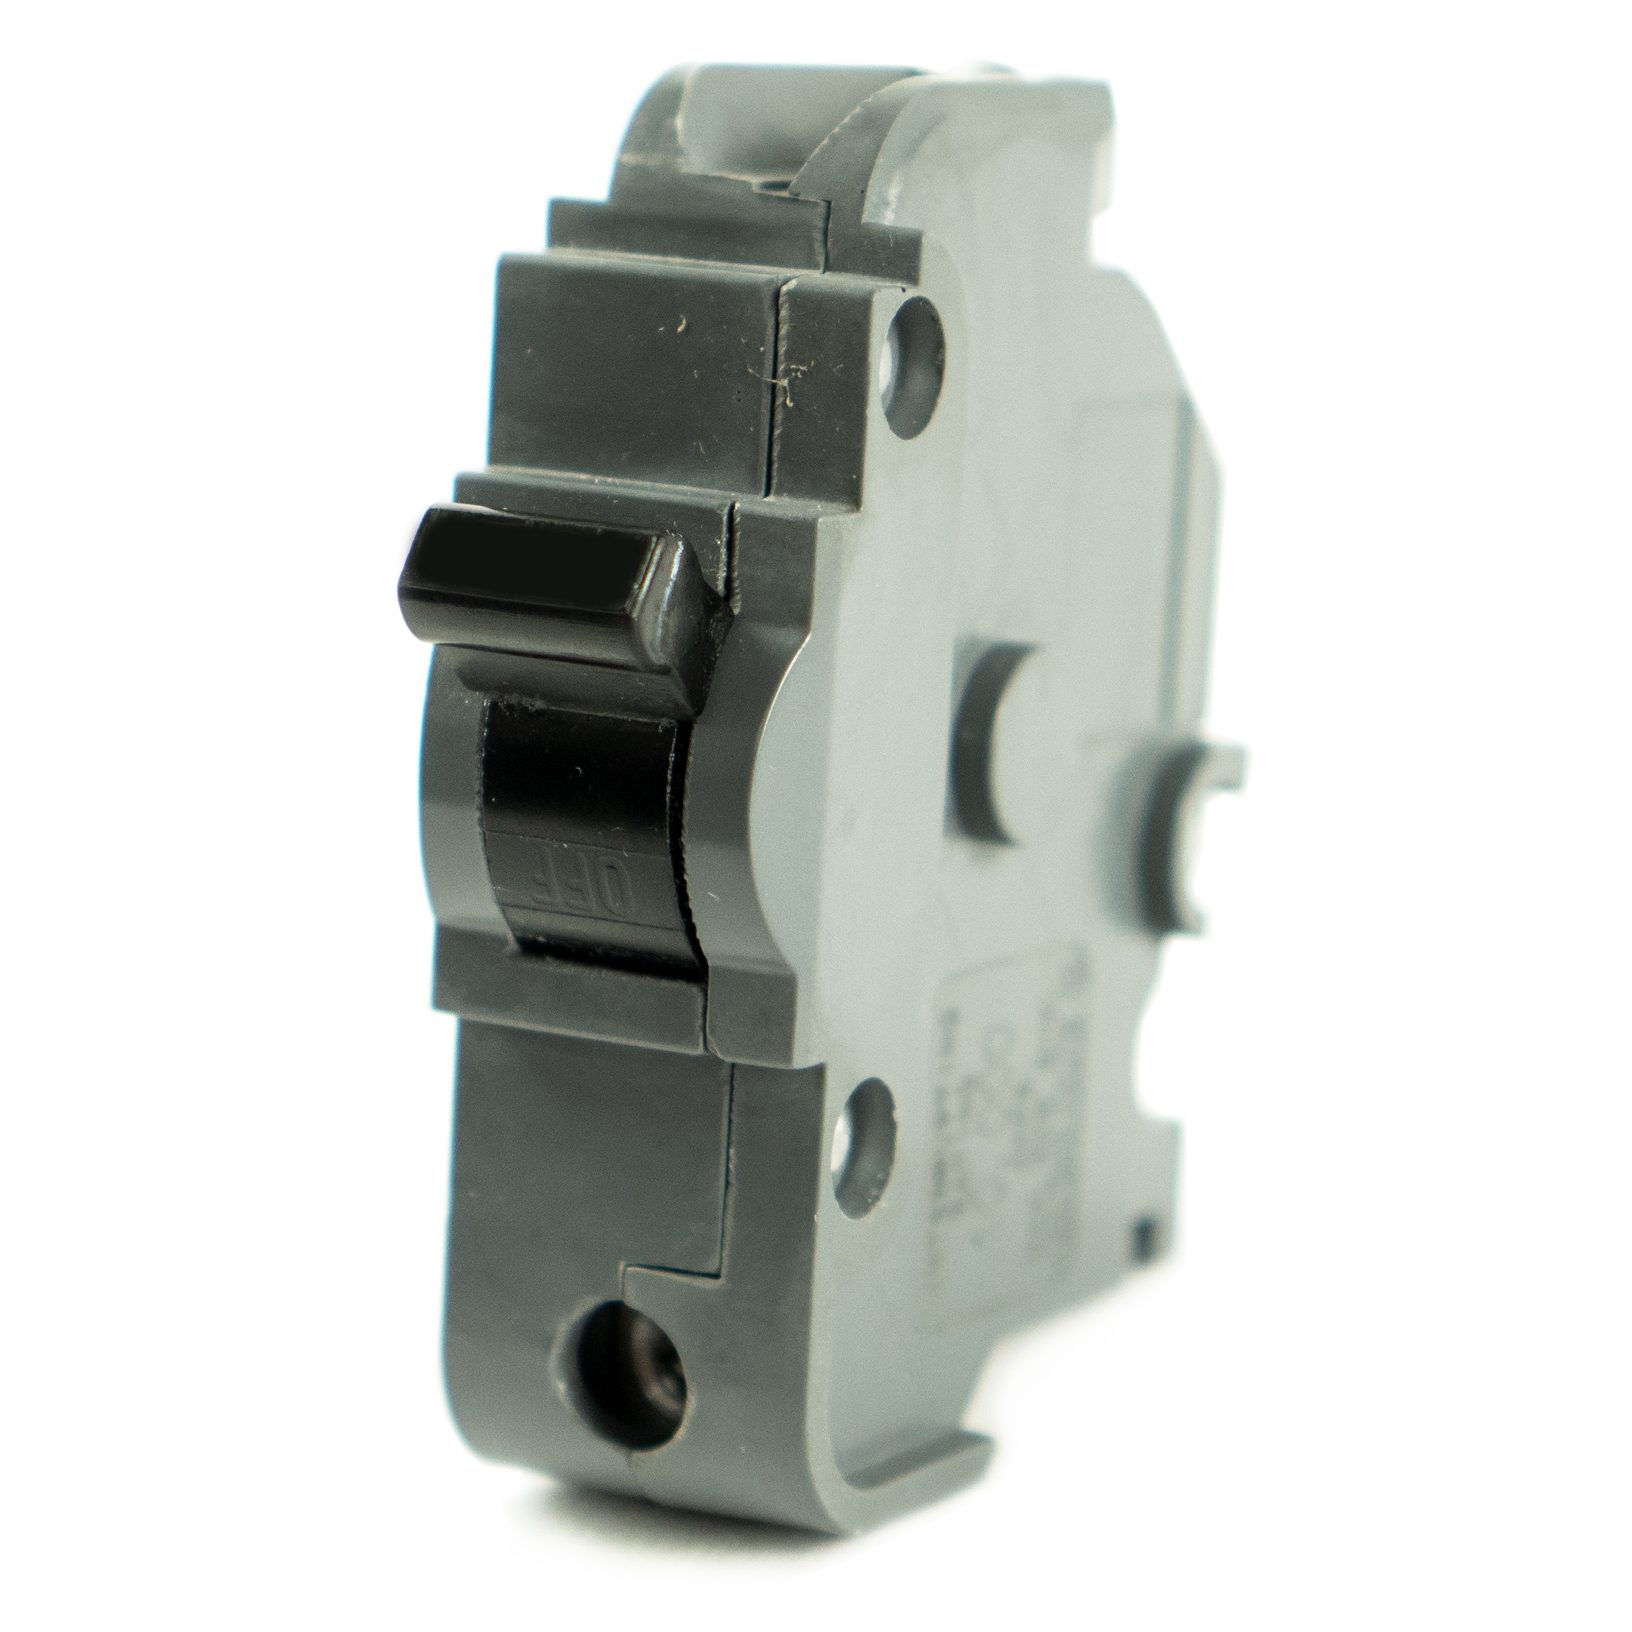 Connecticut Electric manufactures new high quality replacement circuit breakers for NBLP® load centers that accept NB style circuit breakers.  Circuit breakers should only be replaced with new tested and Safety Agency Listed circuit breakers, never used or refurbished ones. ETL Listed. 10,000 AIC. 1-Pole, 20 amp.